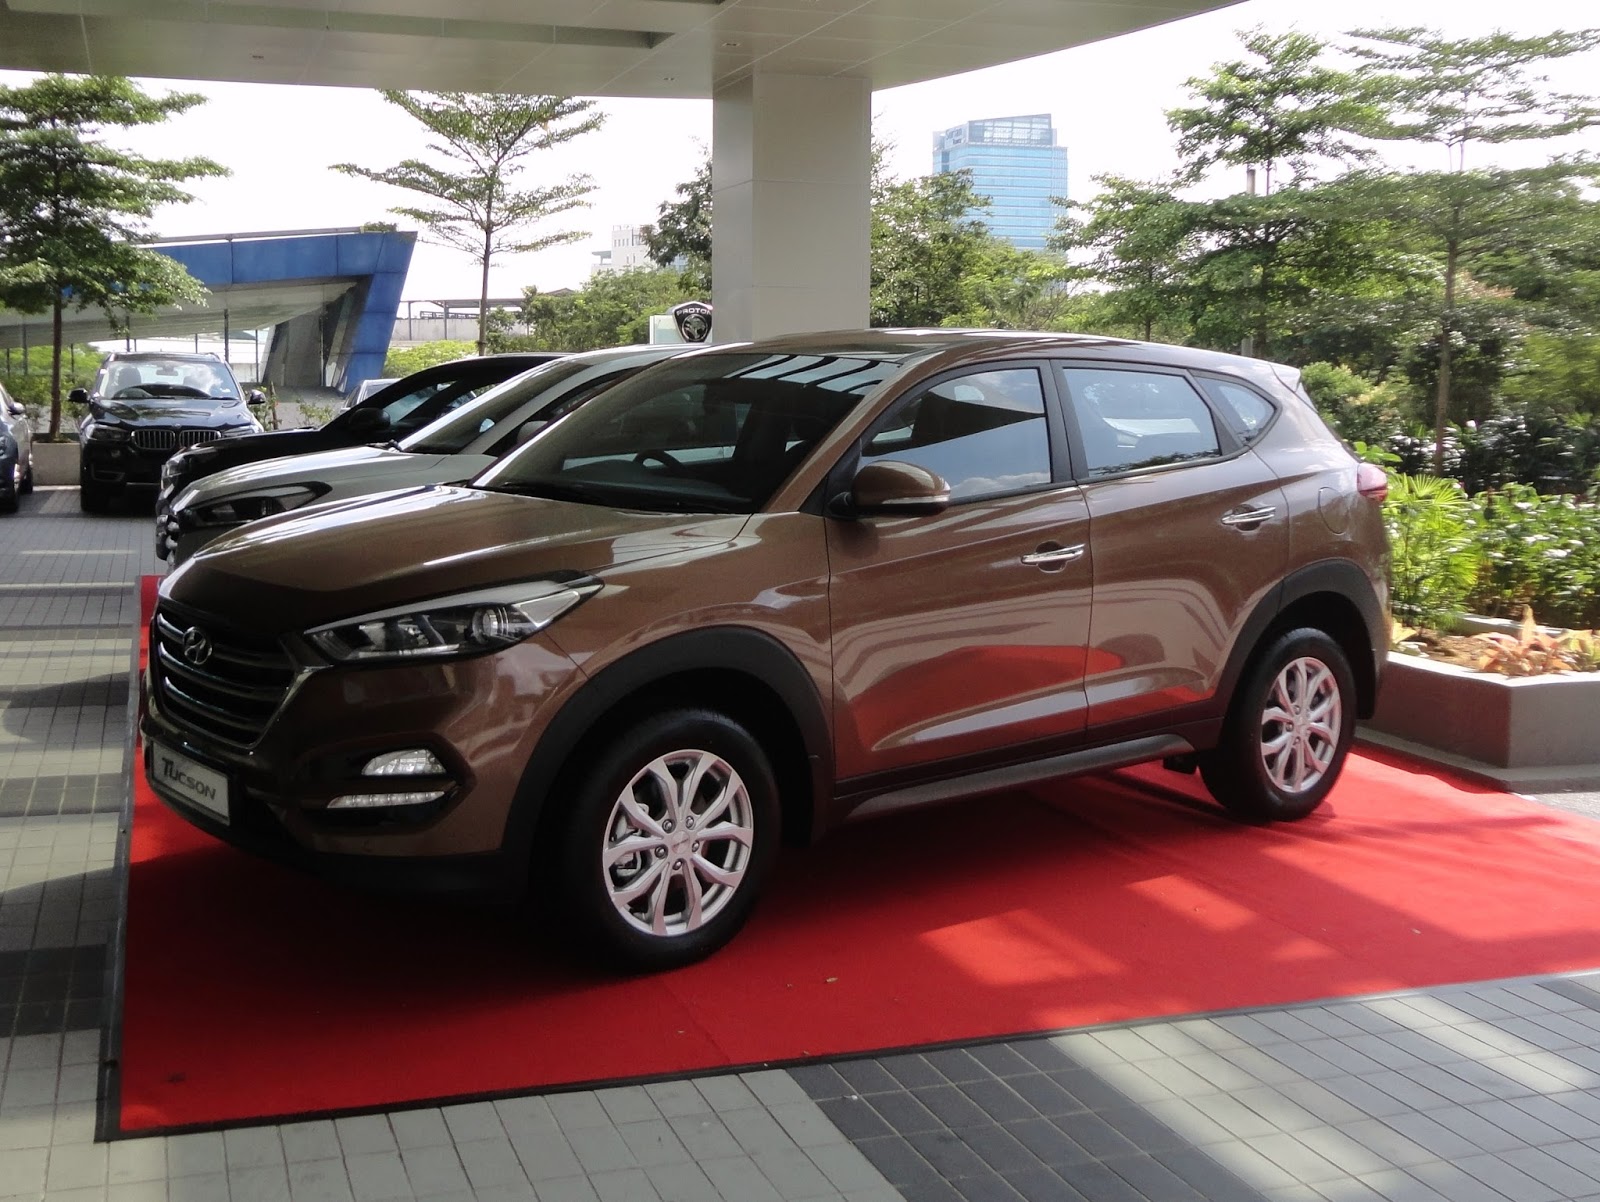 Motoring-Malaysia: All New Hyundai Tucson officially launched